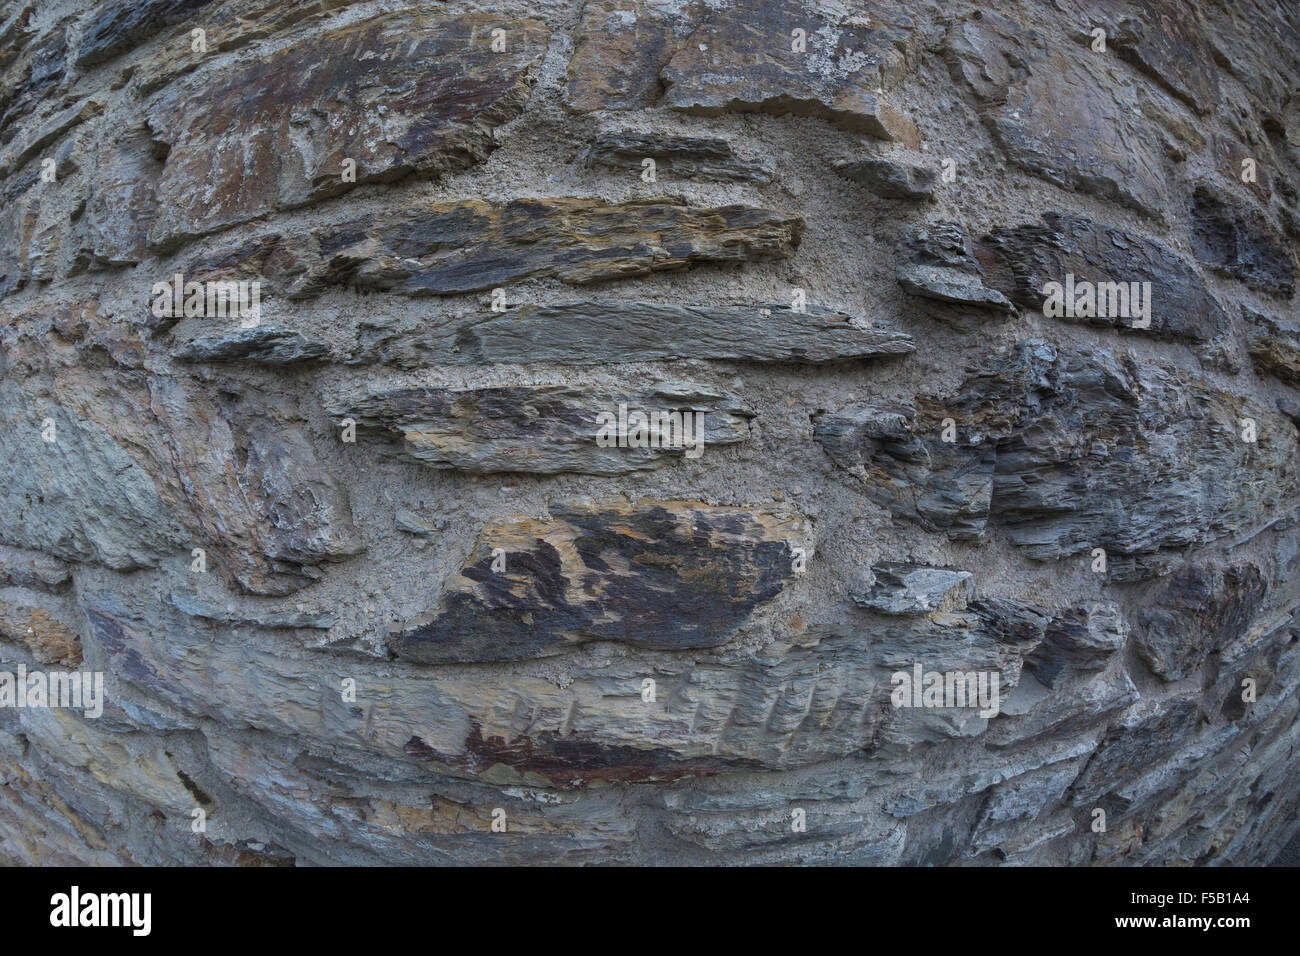 Distorted fisheye close-up shot of stone wall. Metaphor distorted view of life. Stock Photo